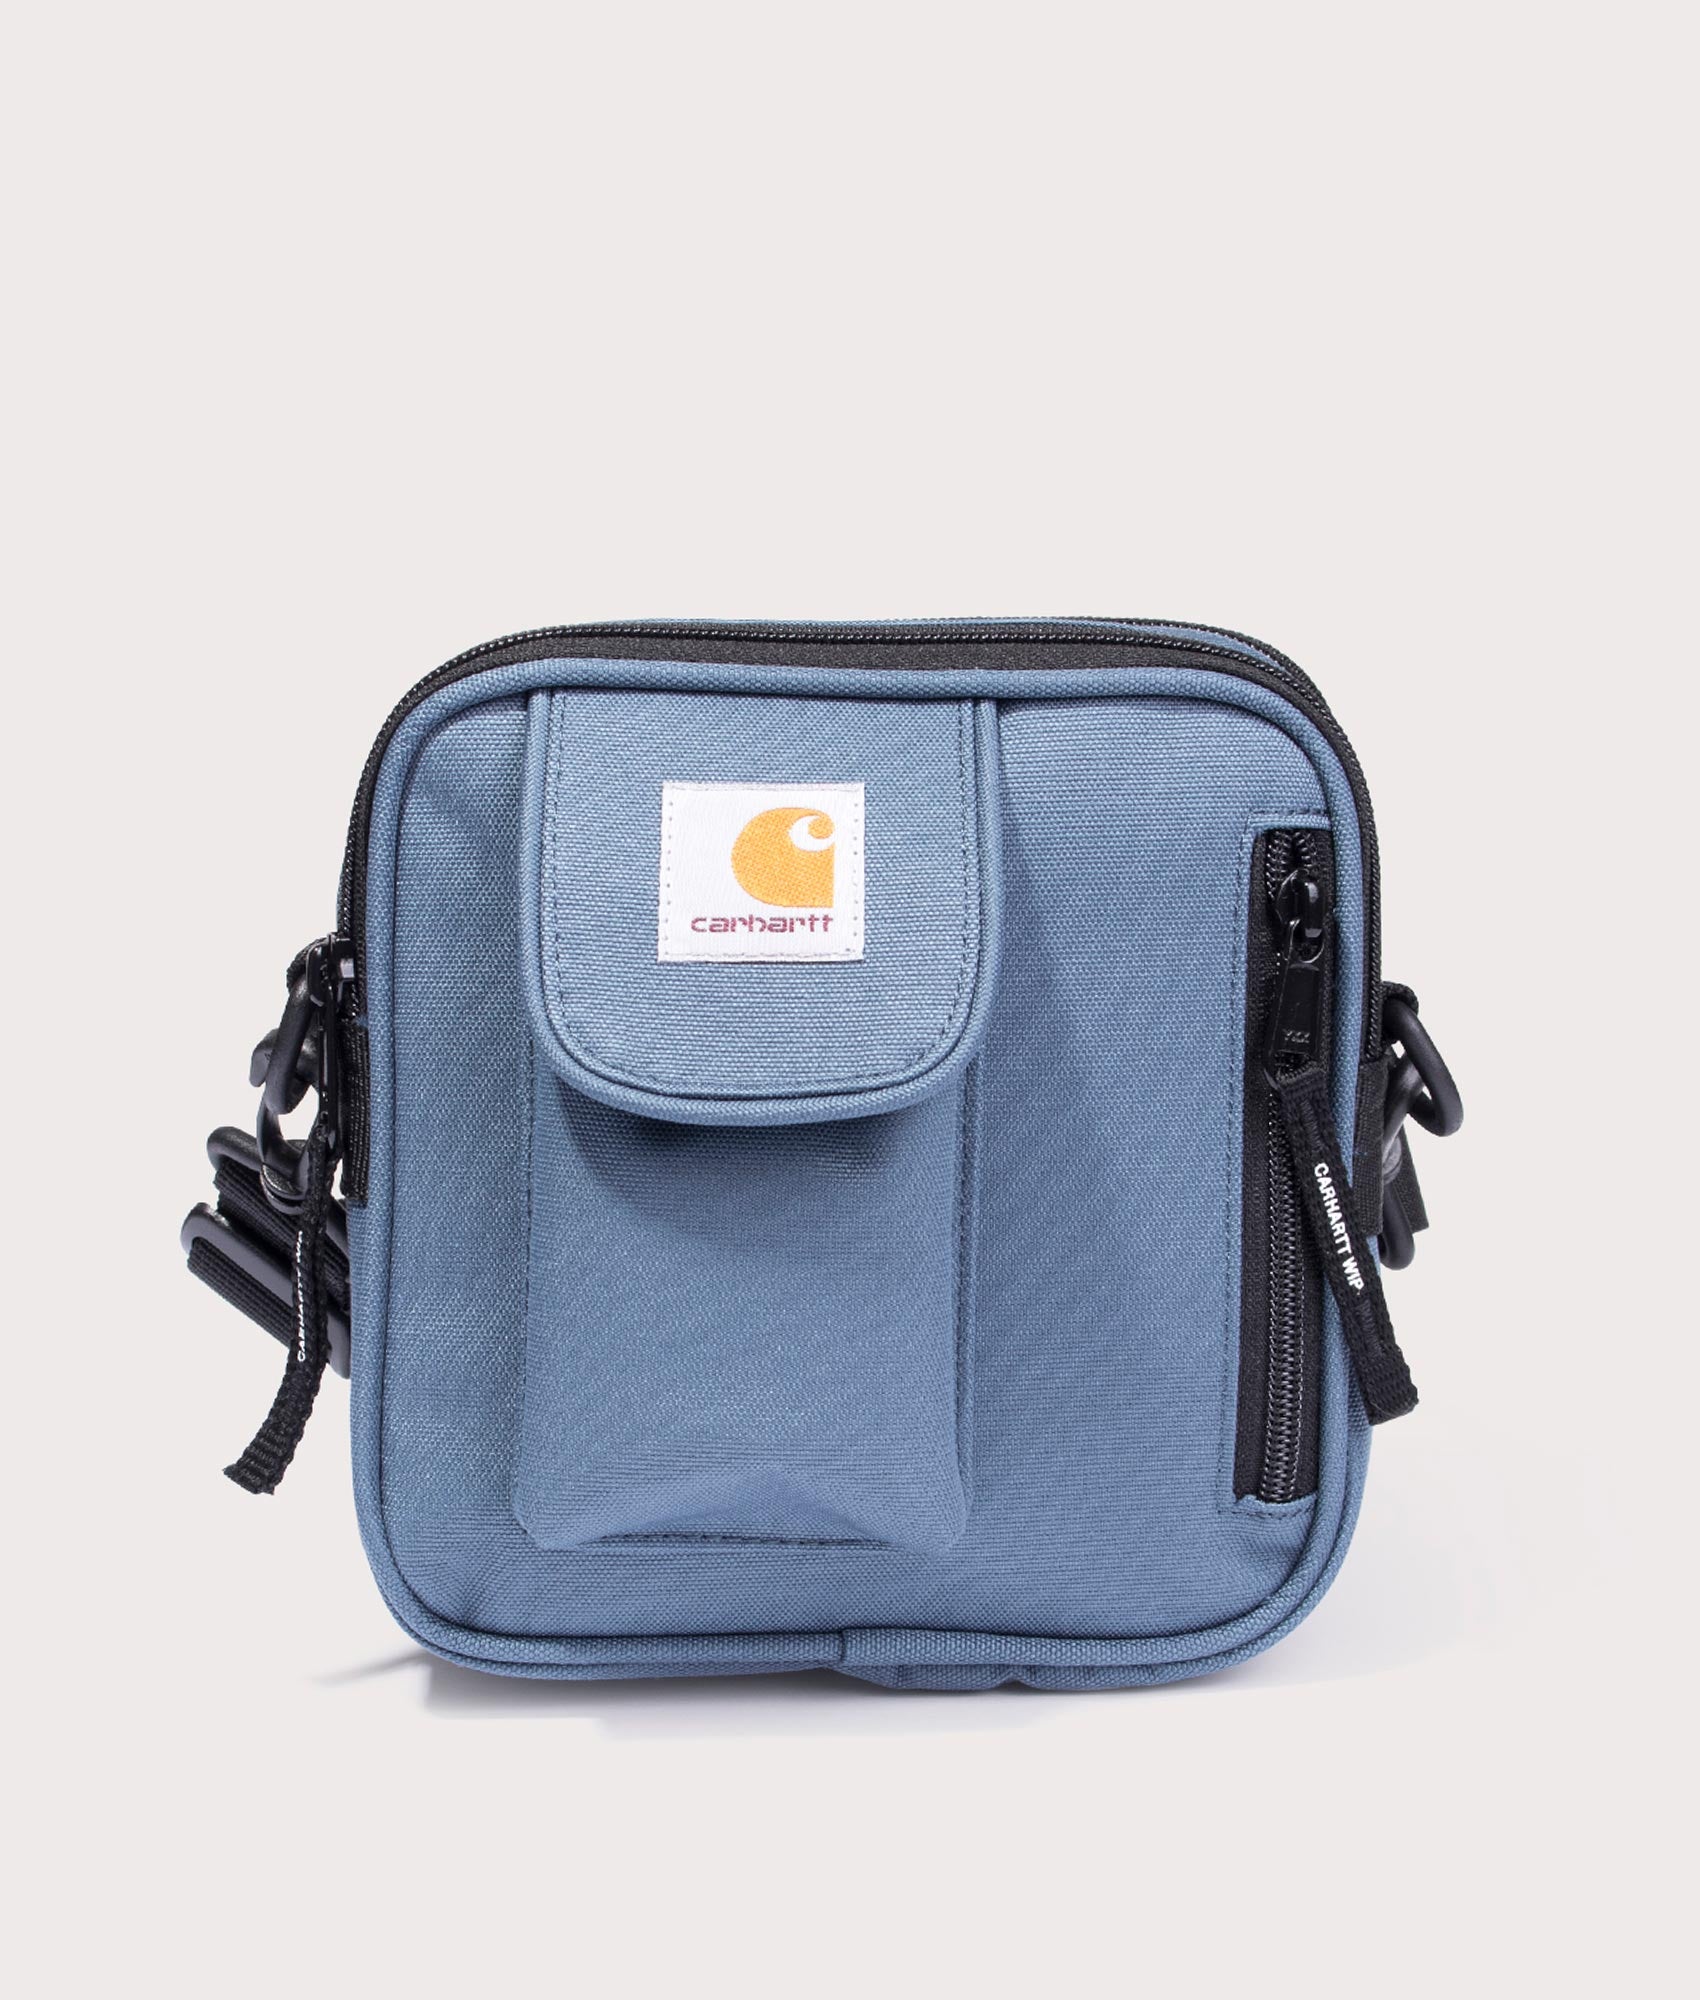 Shop Carhartt WIP Essentials Small Recycled Bag (storm blue